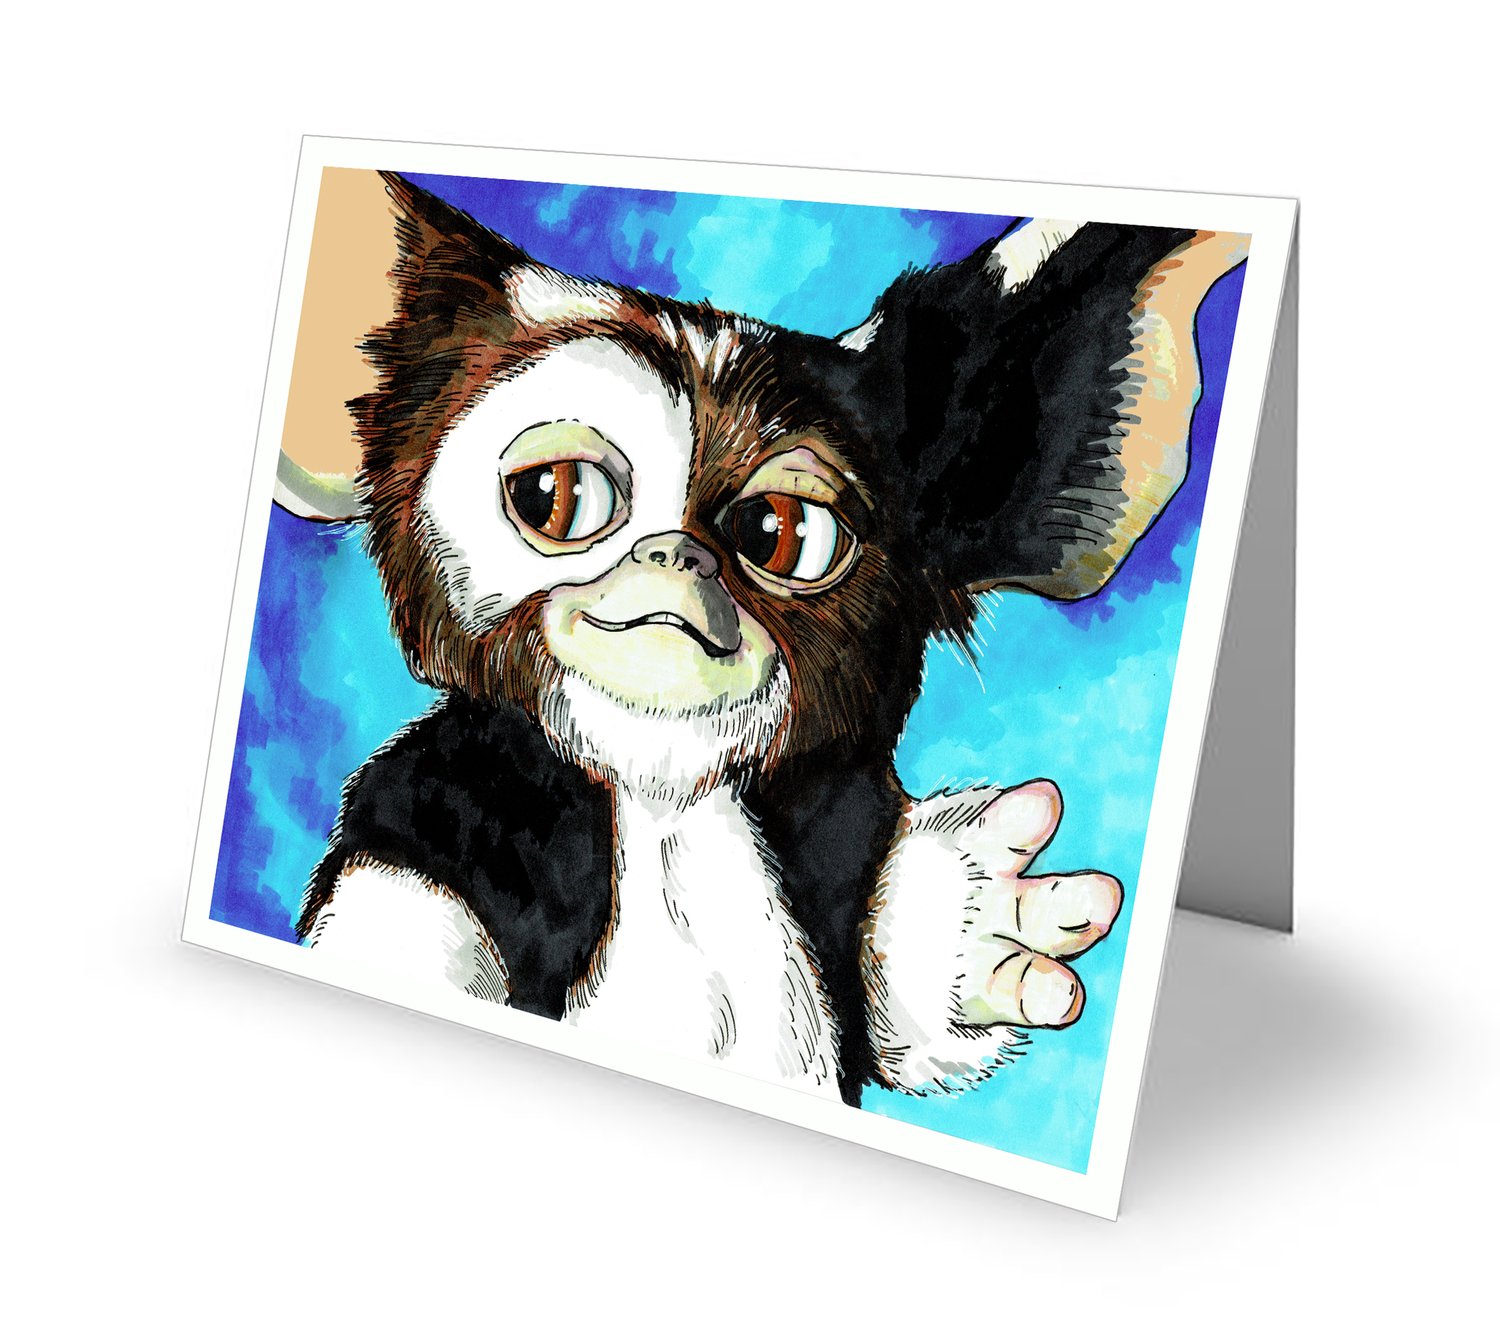 Gizmo (Gremlins) Greetings Card with Envelope (C6 Size)